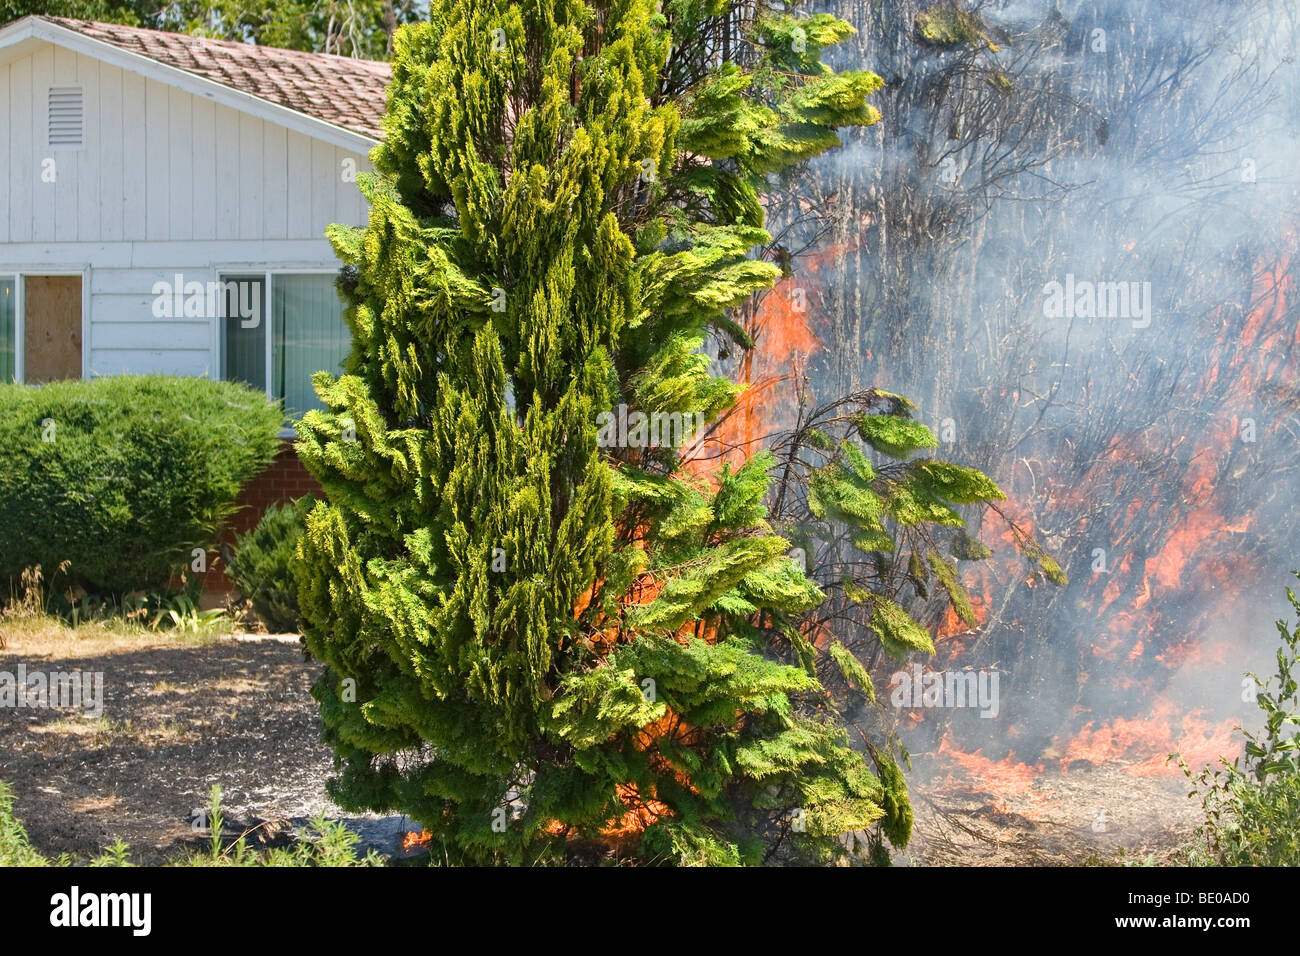 A hedge of arborvitae on fire in Canyon County, Idaho, USA. Stock Photo